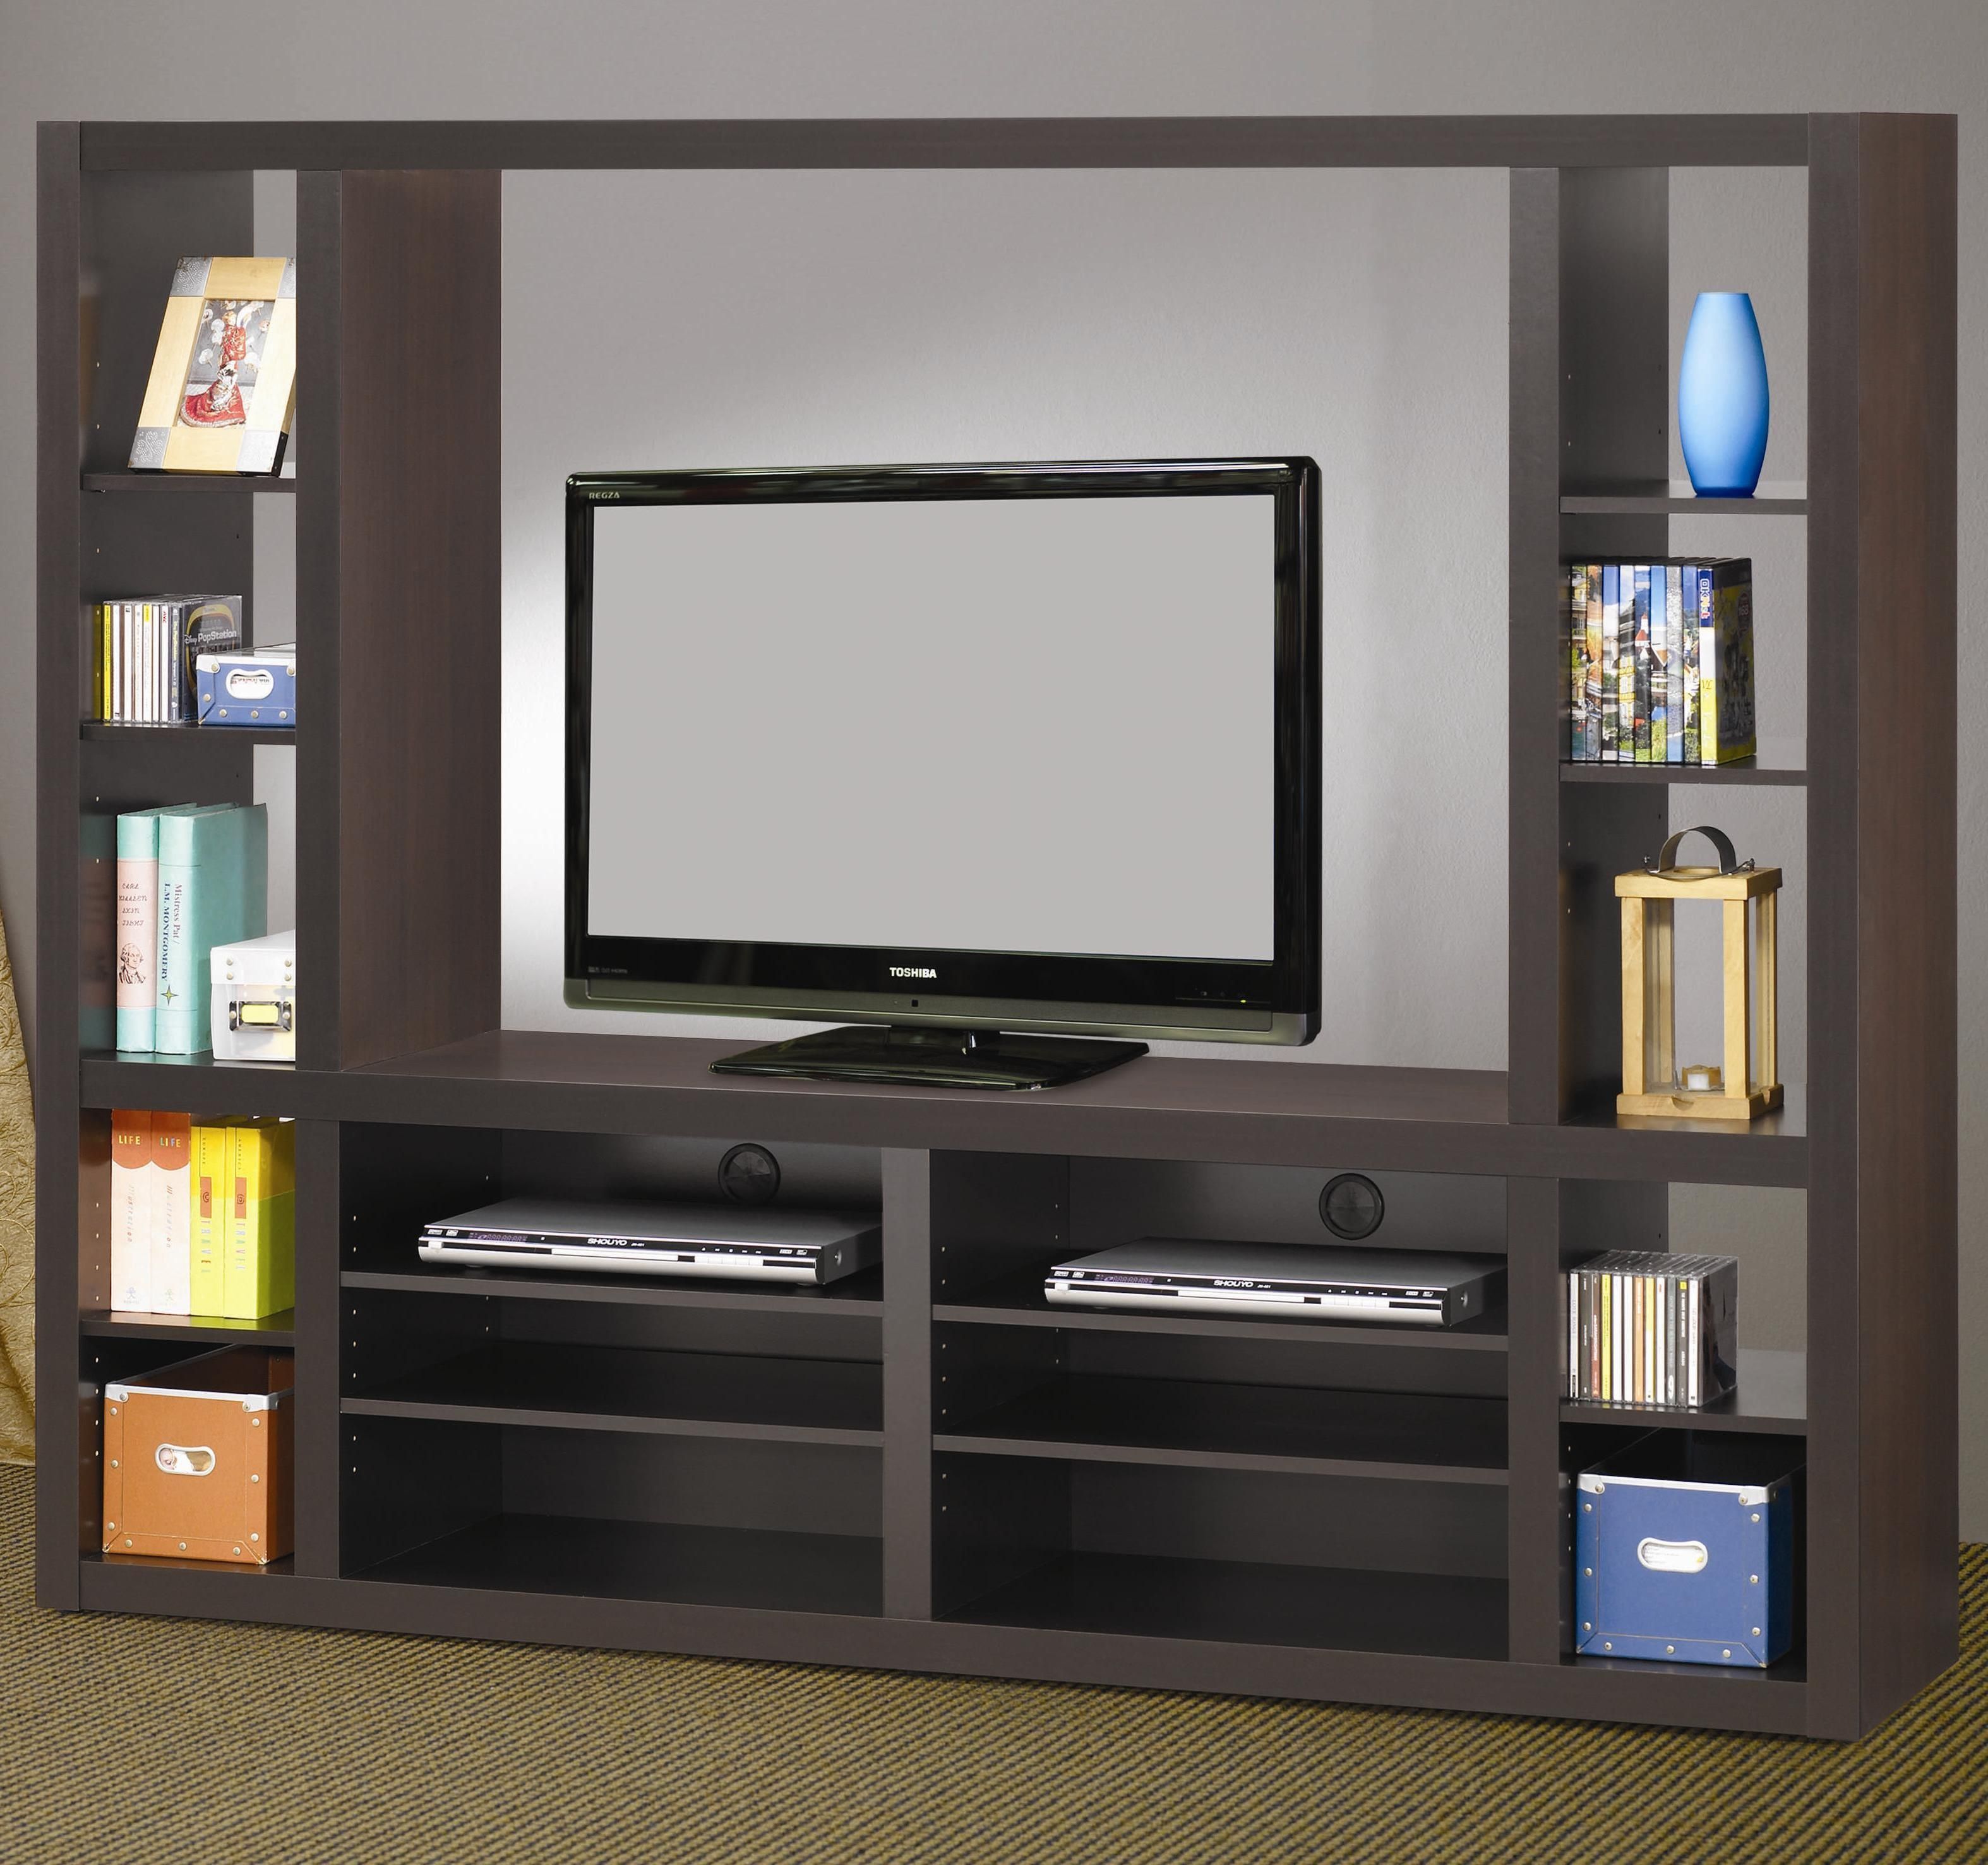 Diy Wall Tv Unit For Living Room Wood Cabinet With Hd Units Inside Tv Bookshelf Unit (View 14 of 15)